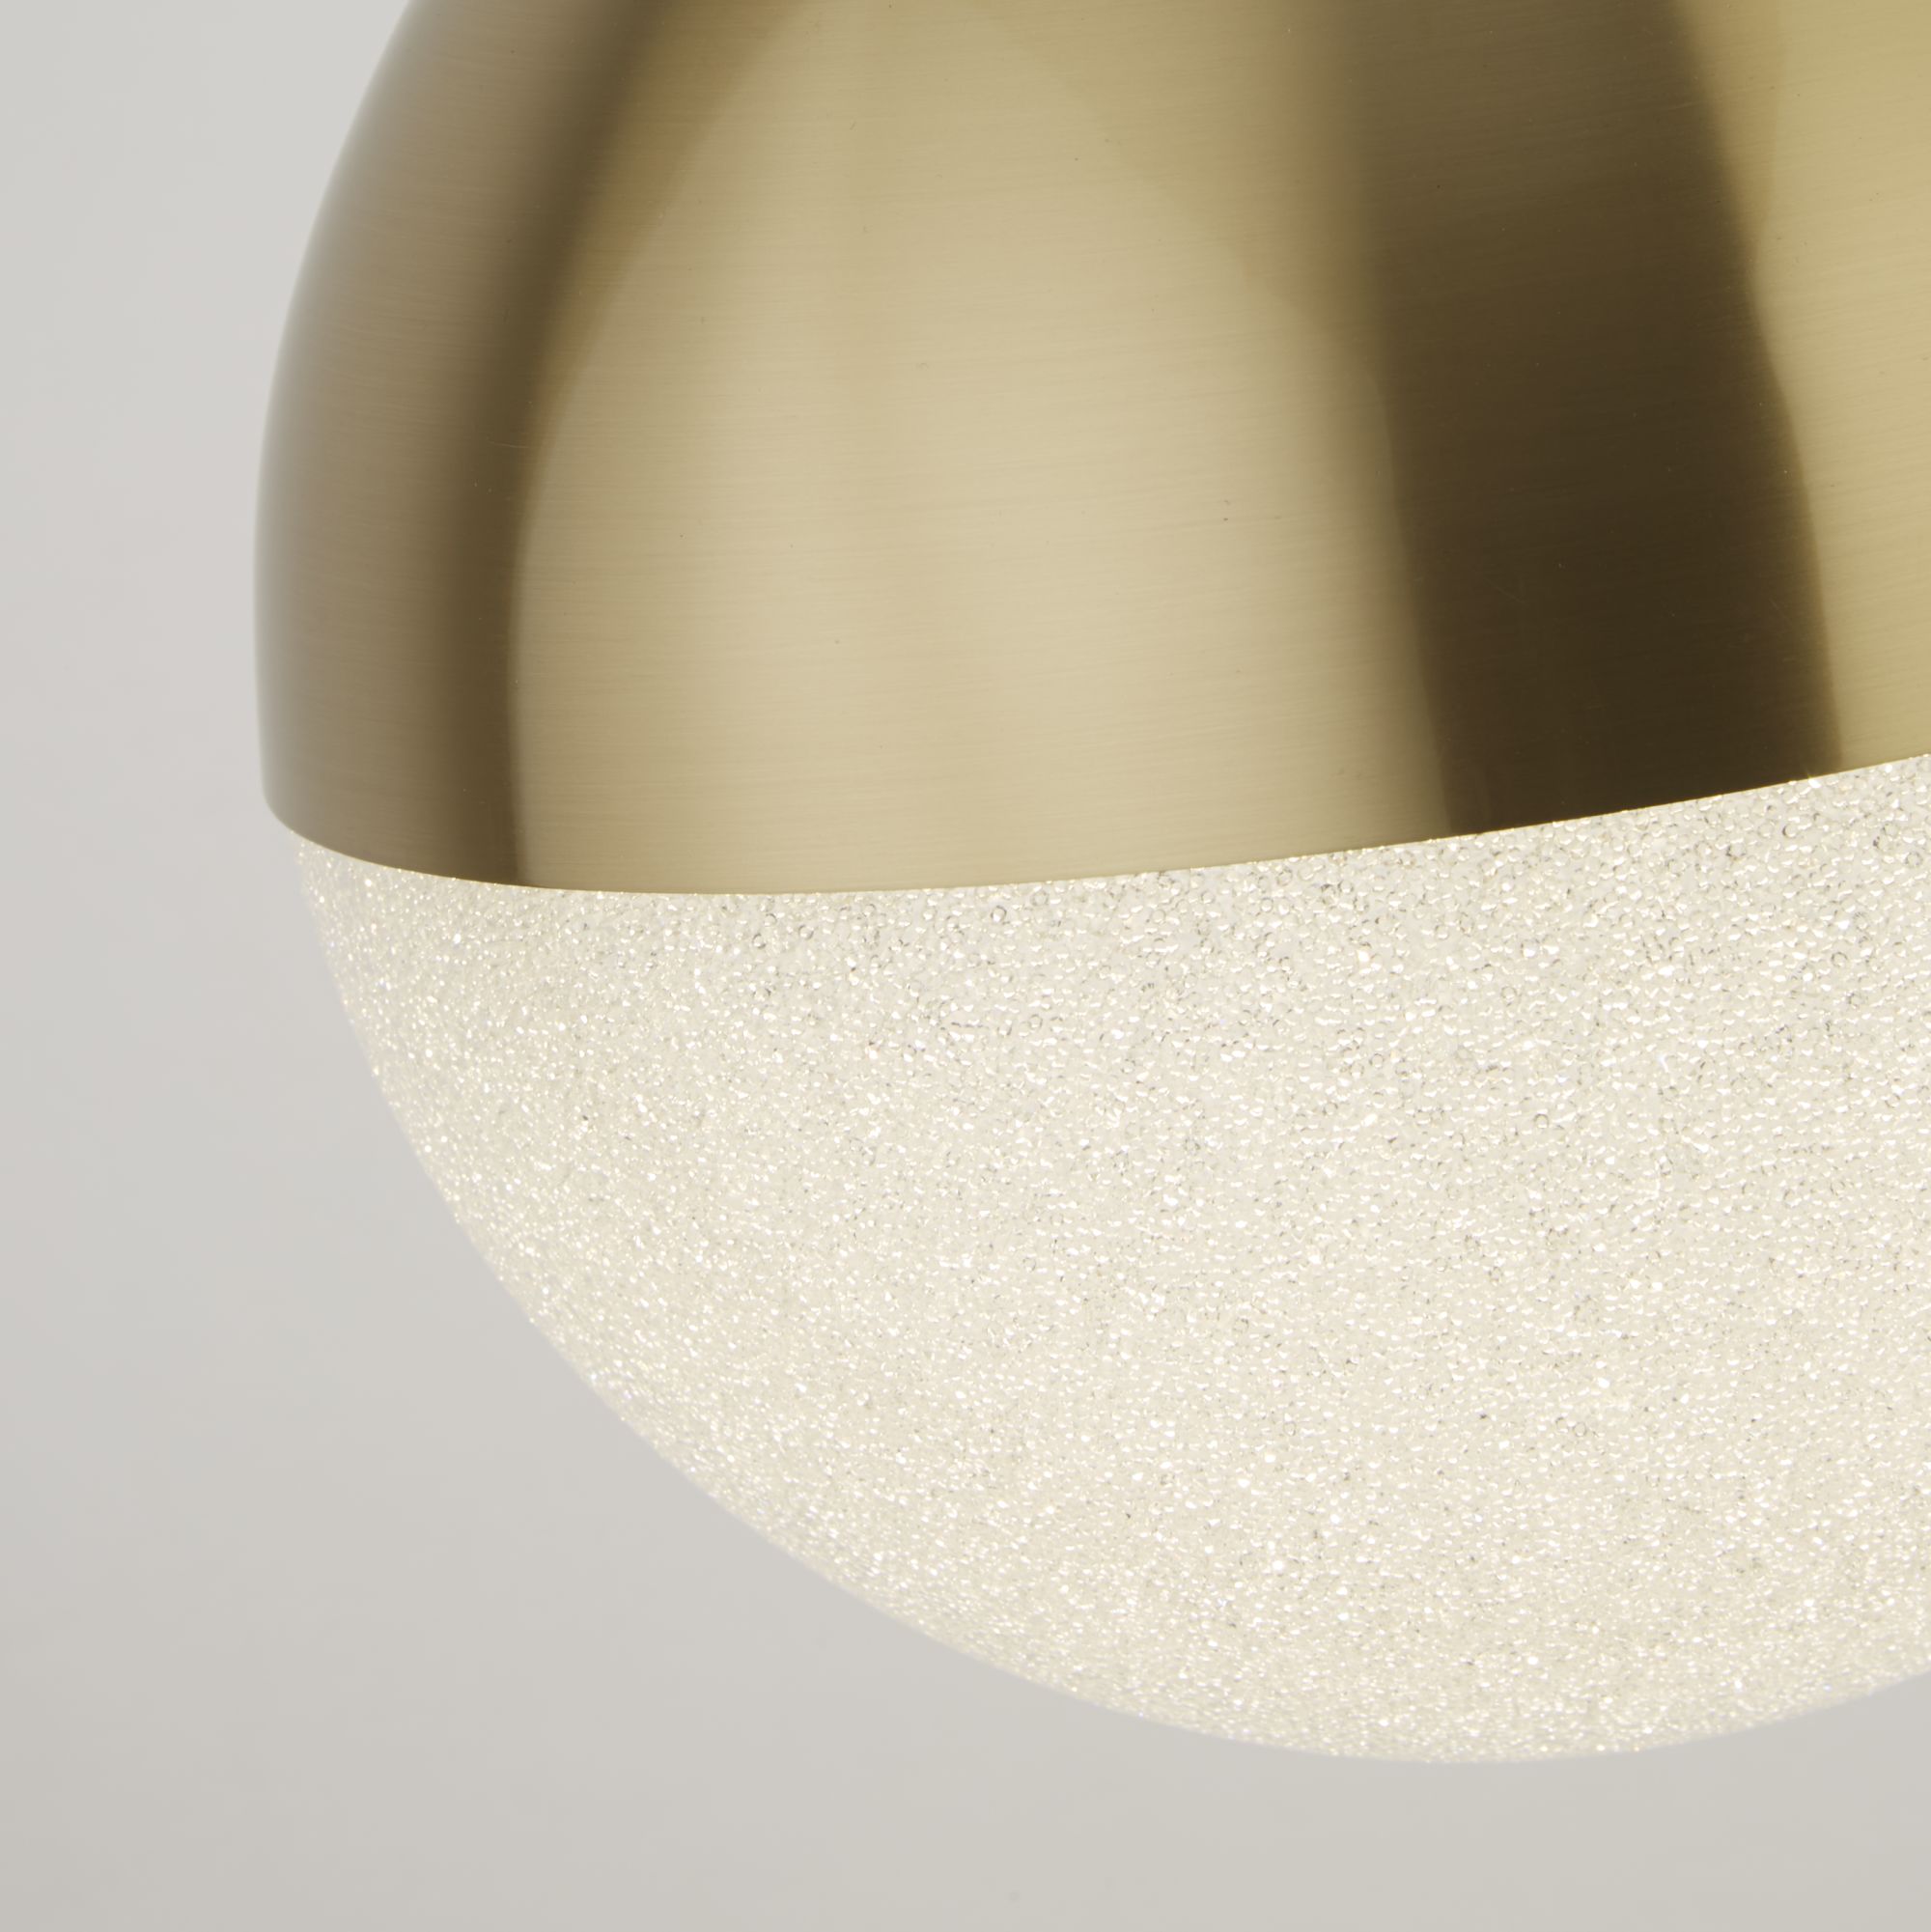 Marbles Pendant - Satin Brass Metal & Crushed Ice Shade